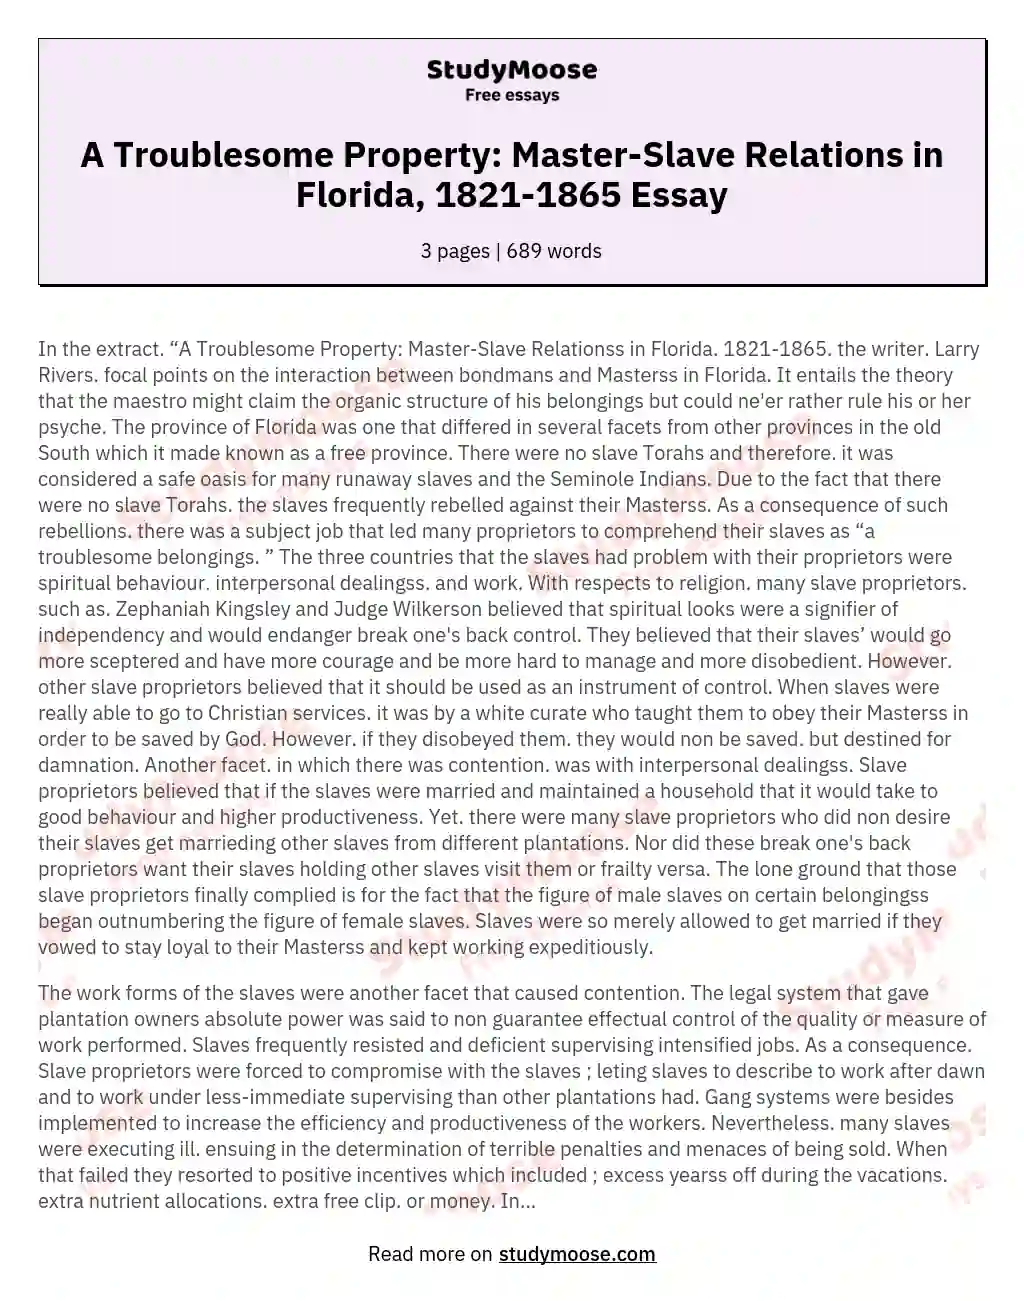 A Troublesome Property: Master-Slave Relations in Florida, 1821-1865 Essay essay